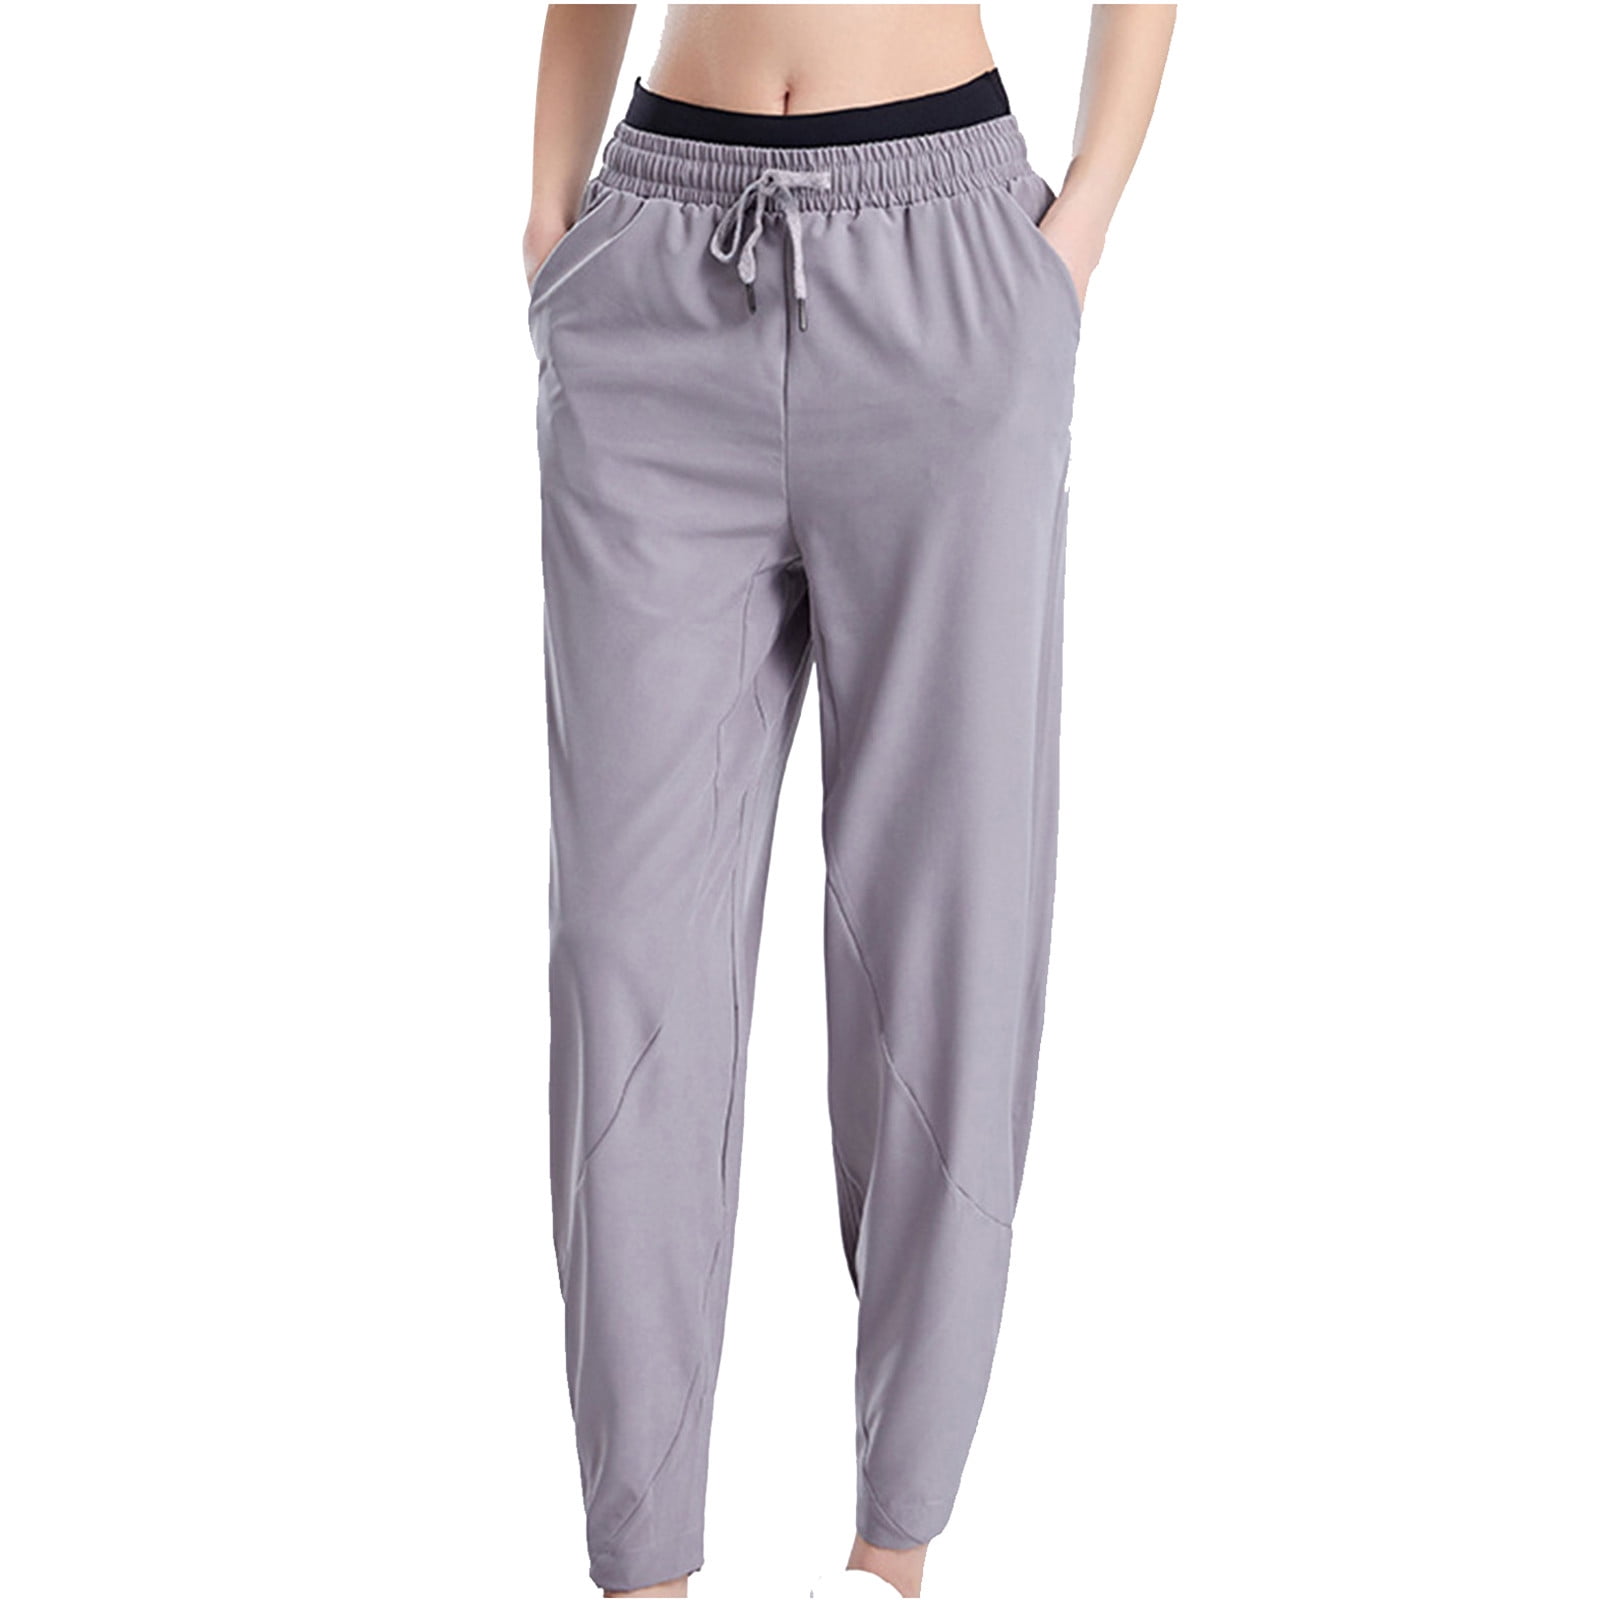 Ecqkame Women's High Waisted Sweatpants Clearance Women's Sports Pants  Loose Straight Casual Bottom Wide Leg Pants Large Size Bundle Foot Running  Pants Gray M 